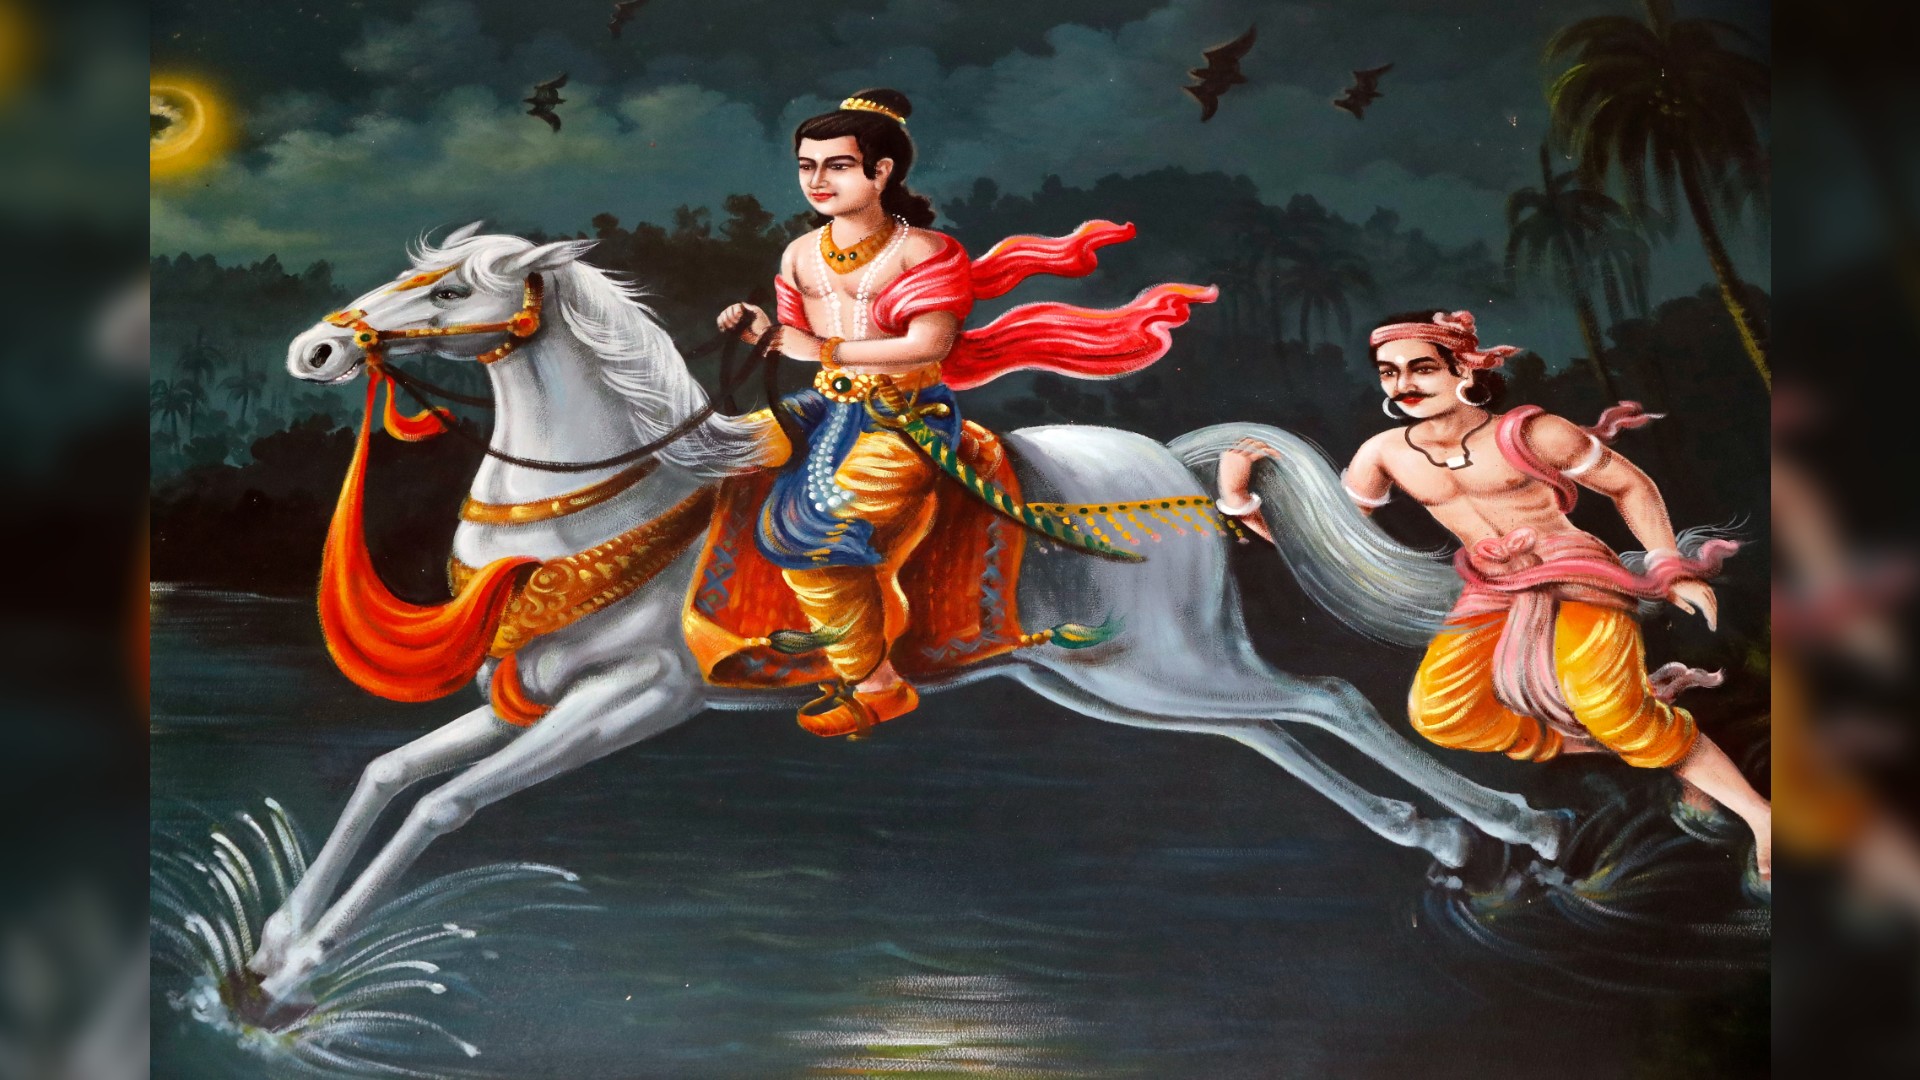 Painting of The Life of the Buddha, Siddhartha Gautama. Prince Siddhartha (long black hair up in a bun, shirtless, blue trousers, knee-high brown riding boots, and adorned with gold jewelery) is riding on Kanthaka his favorite stallion (A large white horse galloping in the water, adorned with a gold bridge and an orange rug as a saddle) and followed by Channa his loyal charioteer (hanging onto the white stallion’s tail, he has long dark hair, tied up, a pink headband, shirtless, yellow trousers and a pink sash around his waist). It is nighttime and on the far left is a glowing yellow moon, cloudy skies, and also bats in the air. Chau Doc, Vietnam.